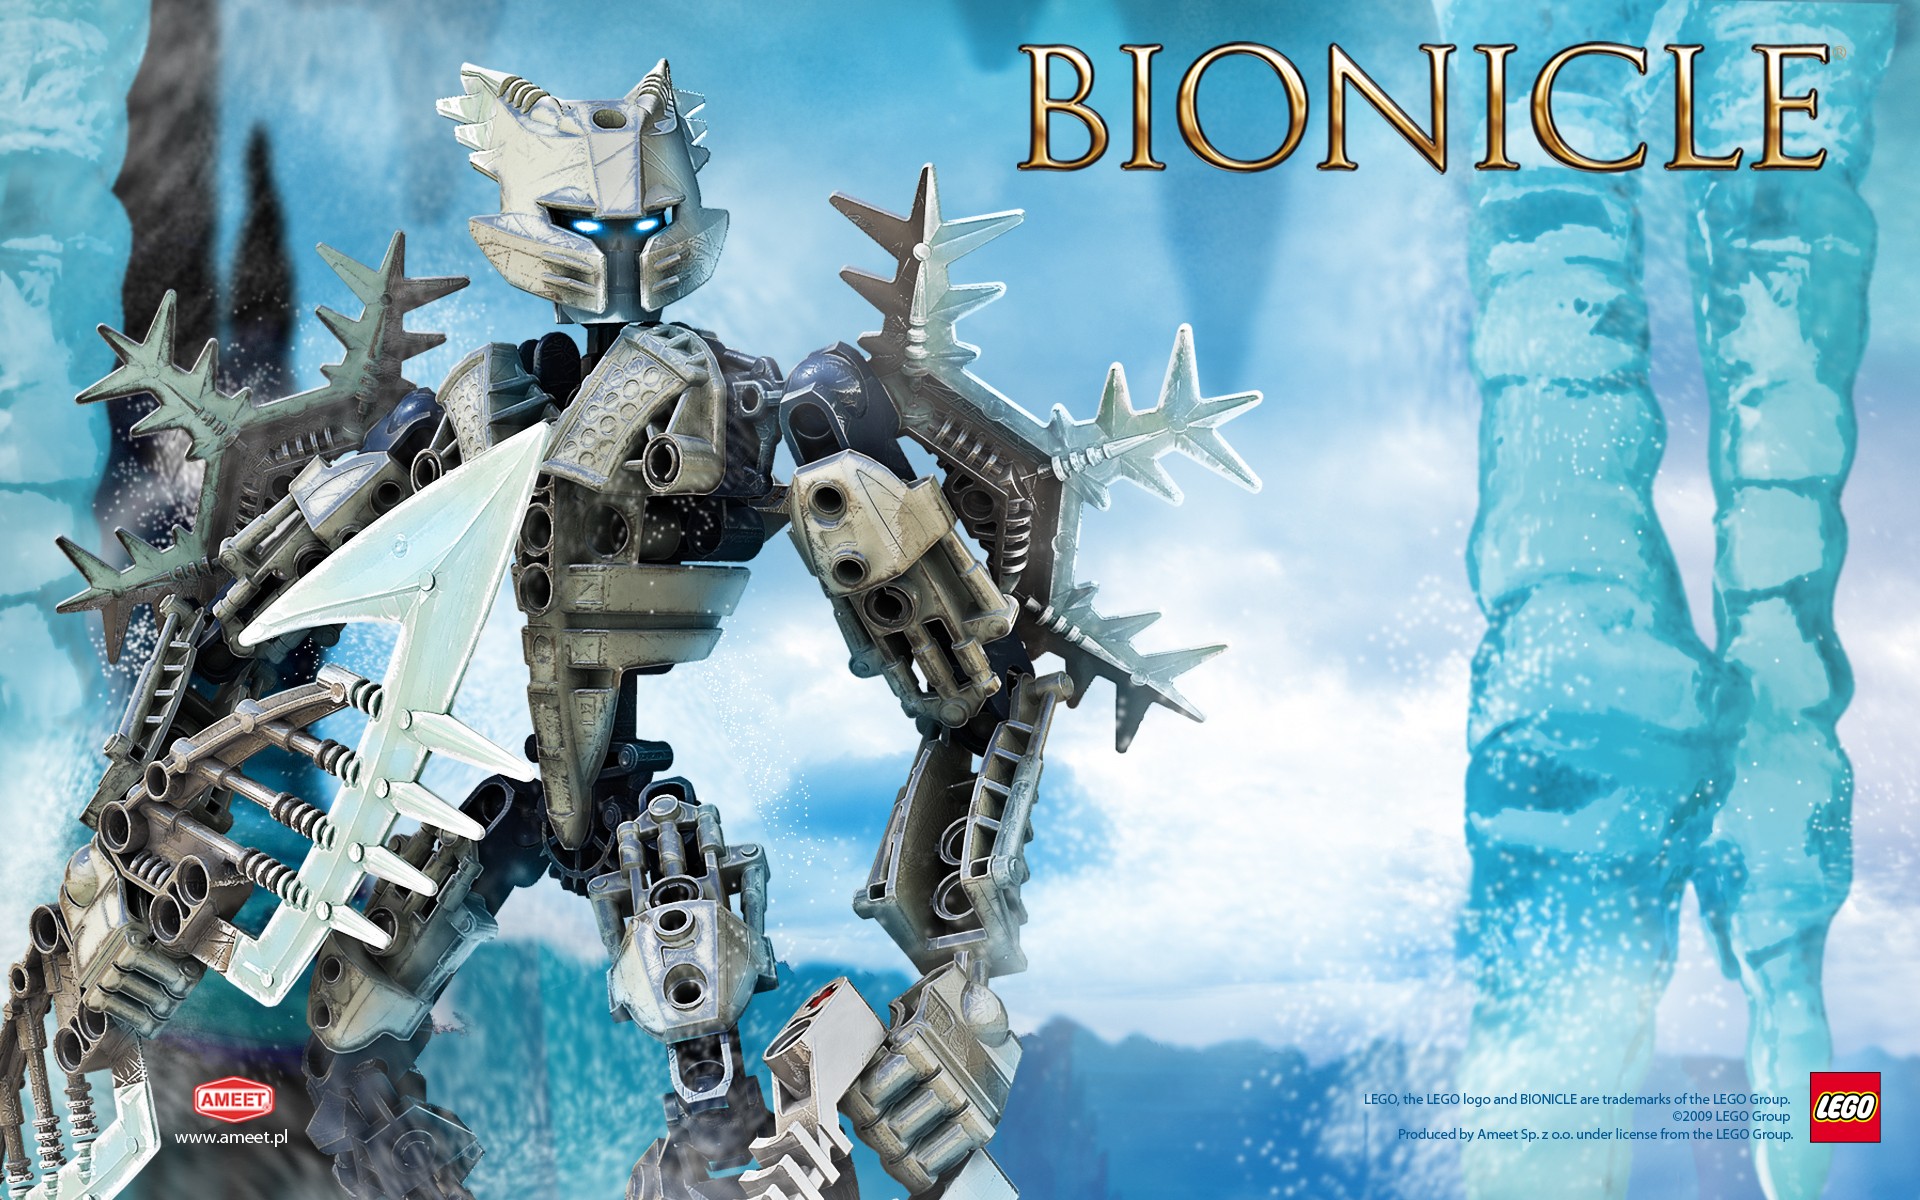 General 1920x1200 Bionicle  ice LEGO toys 2009 (Year)